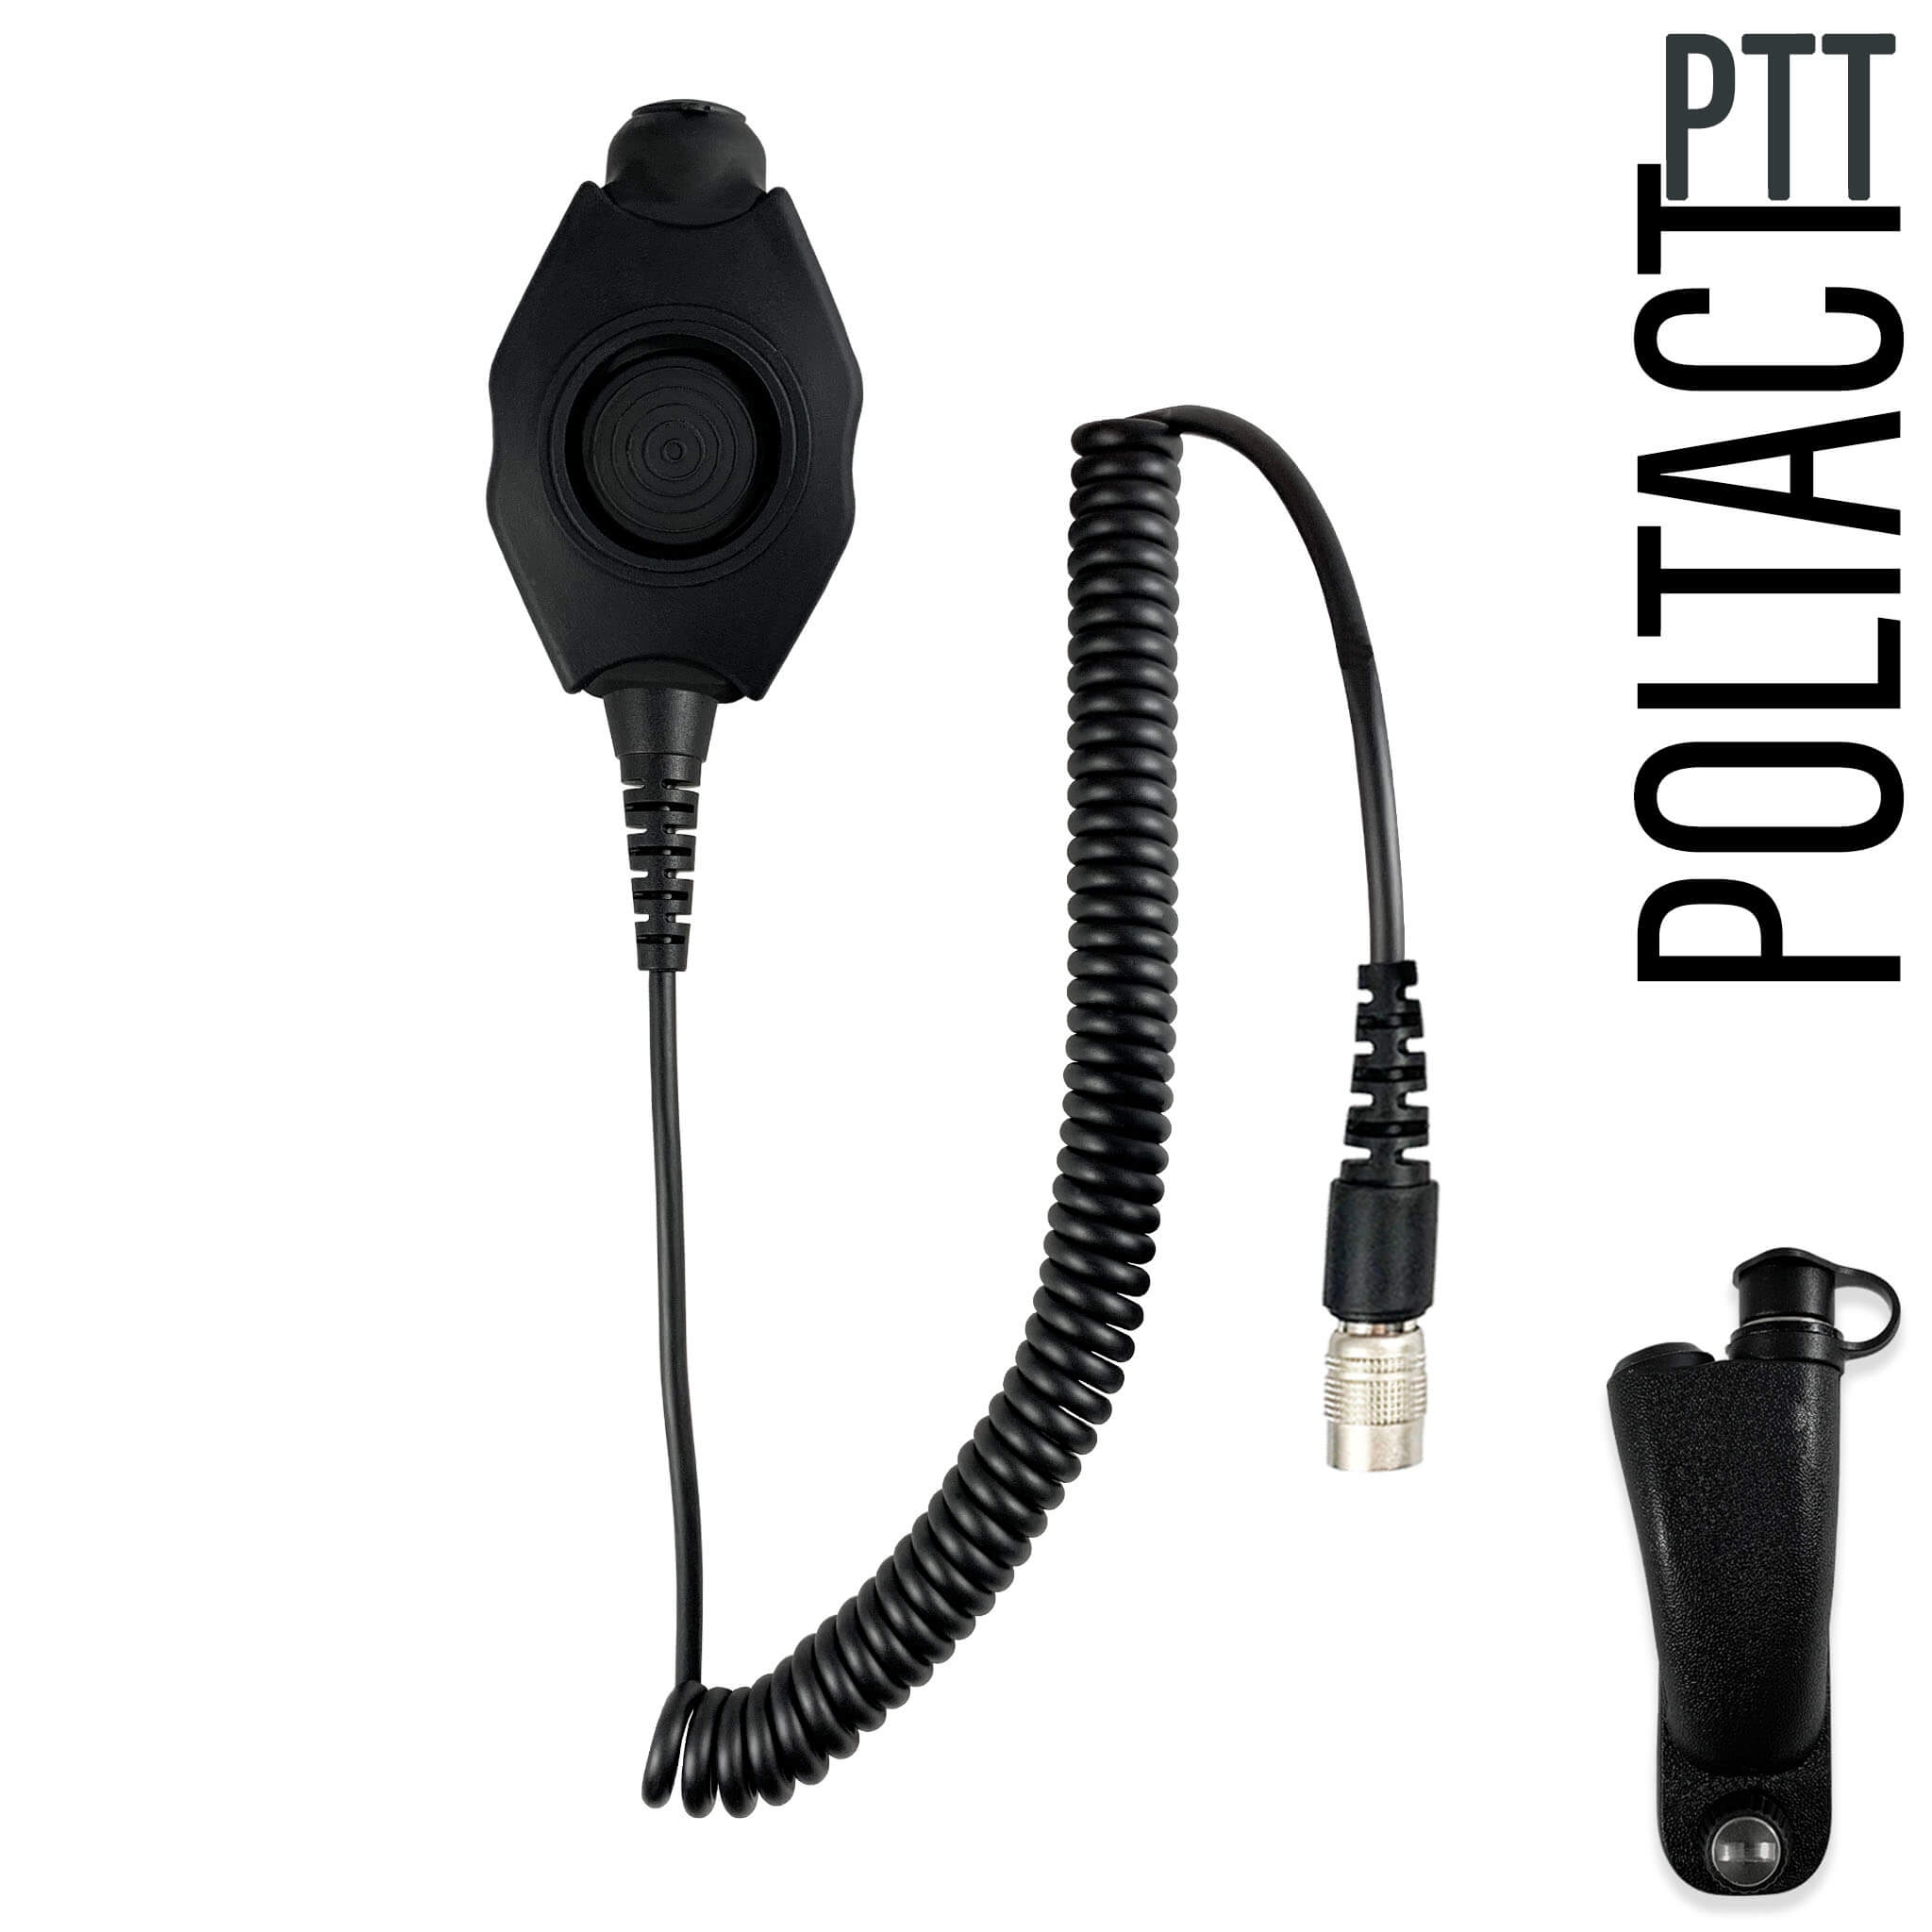 Tactical Radio Adapter/PTT for Headset w/ Quick Disconnect(Hirose